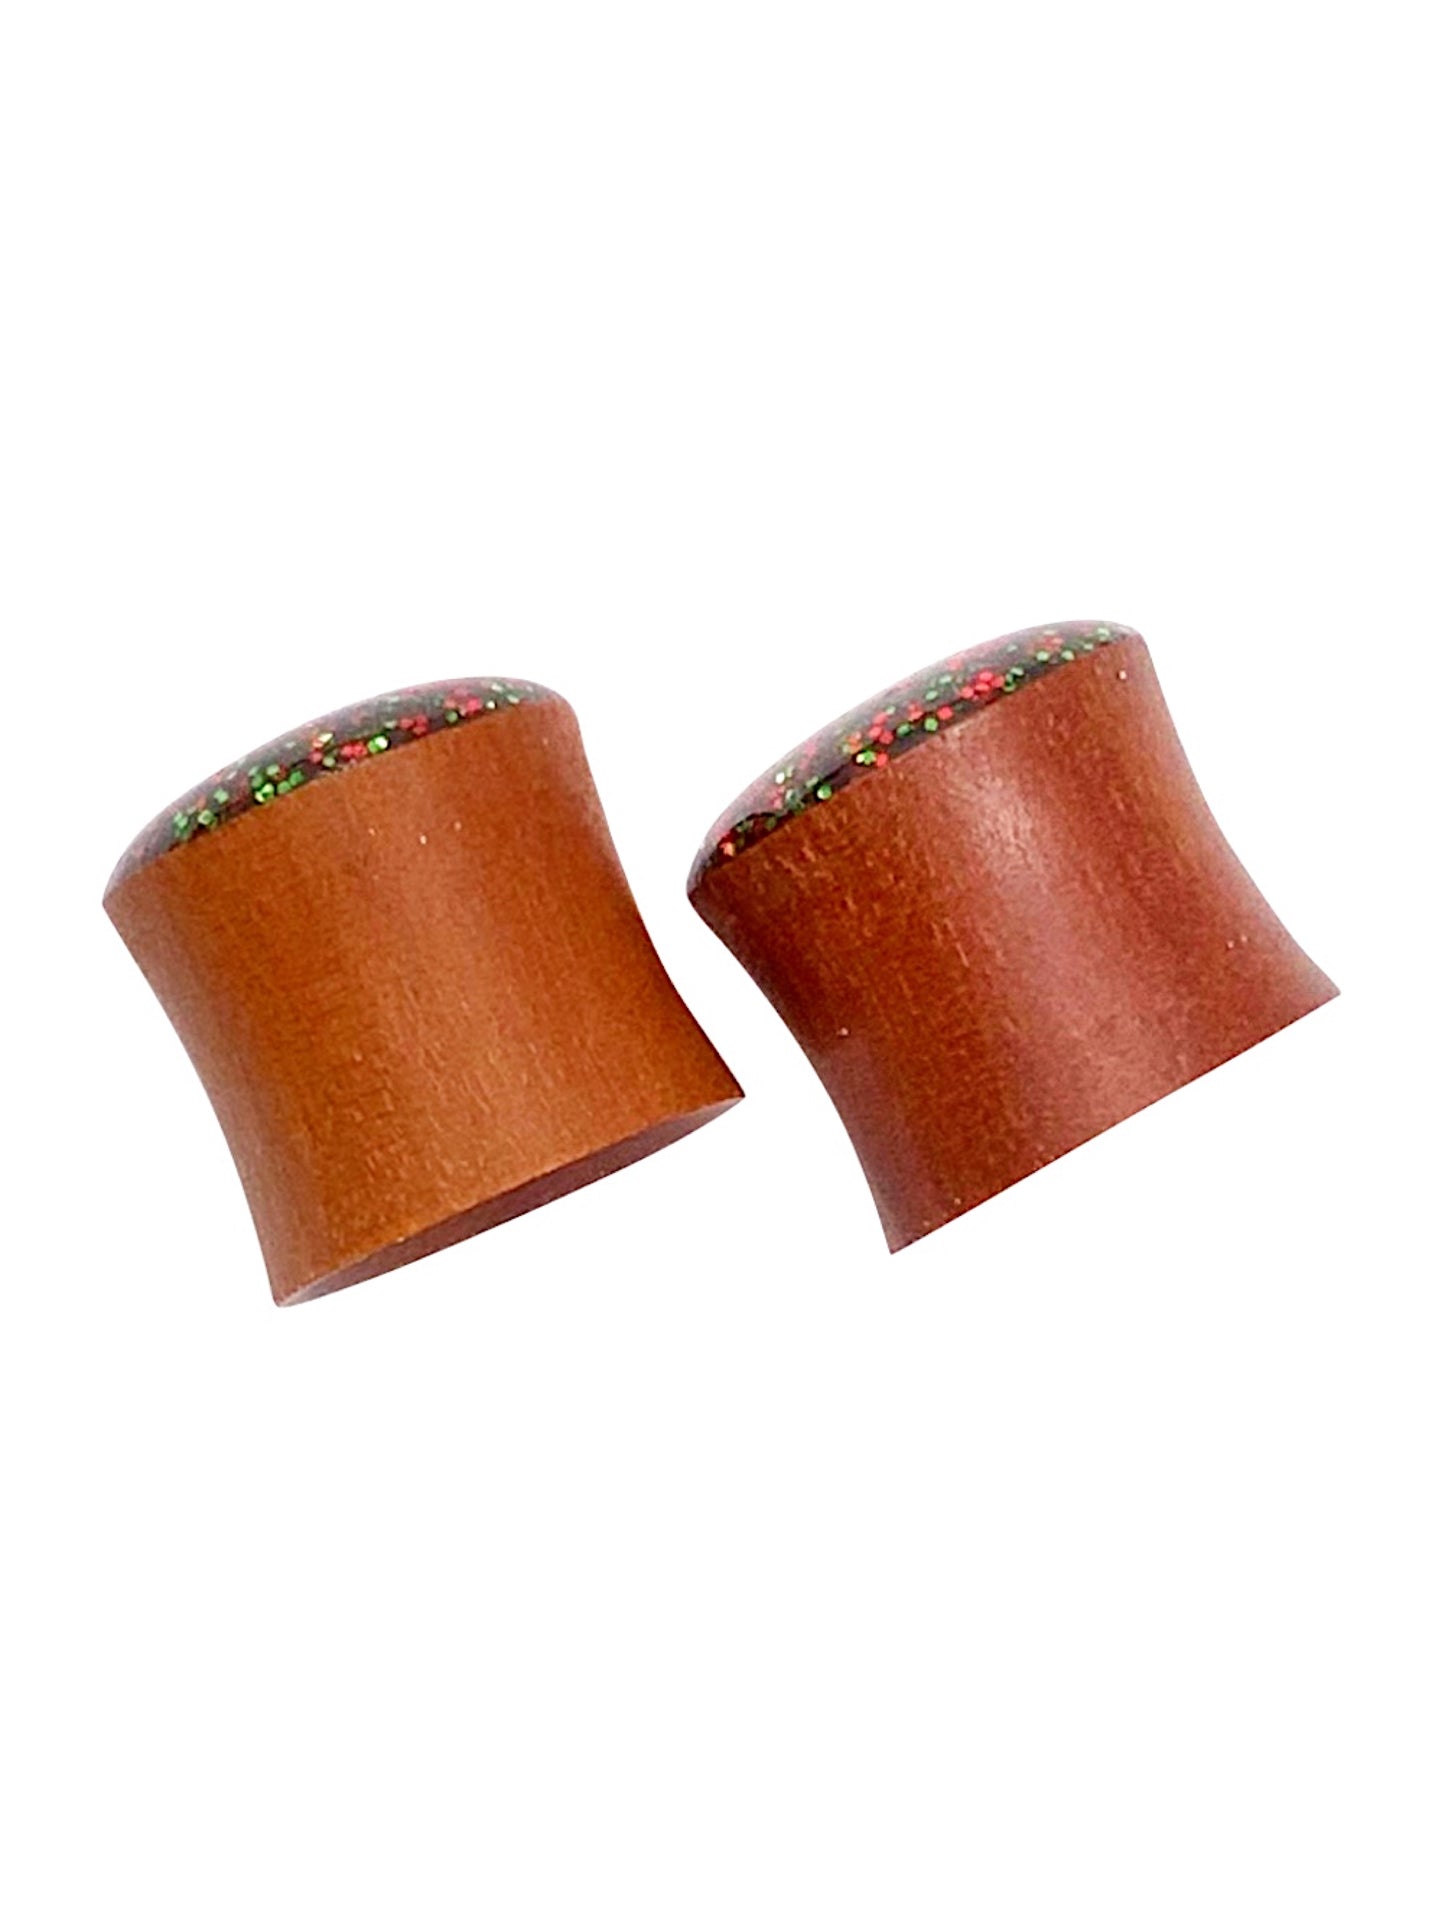 Red and Green Sparkle Wood Plugs